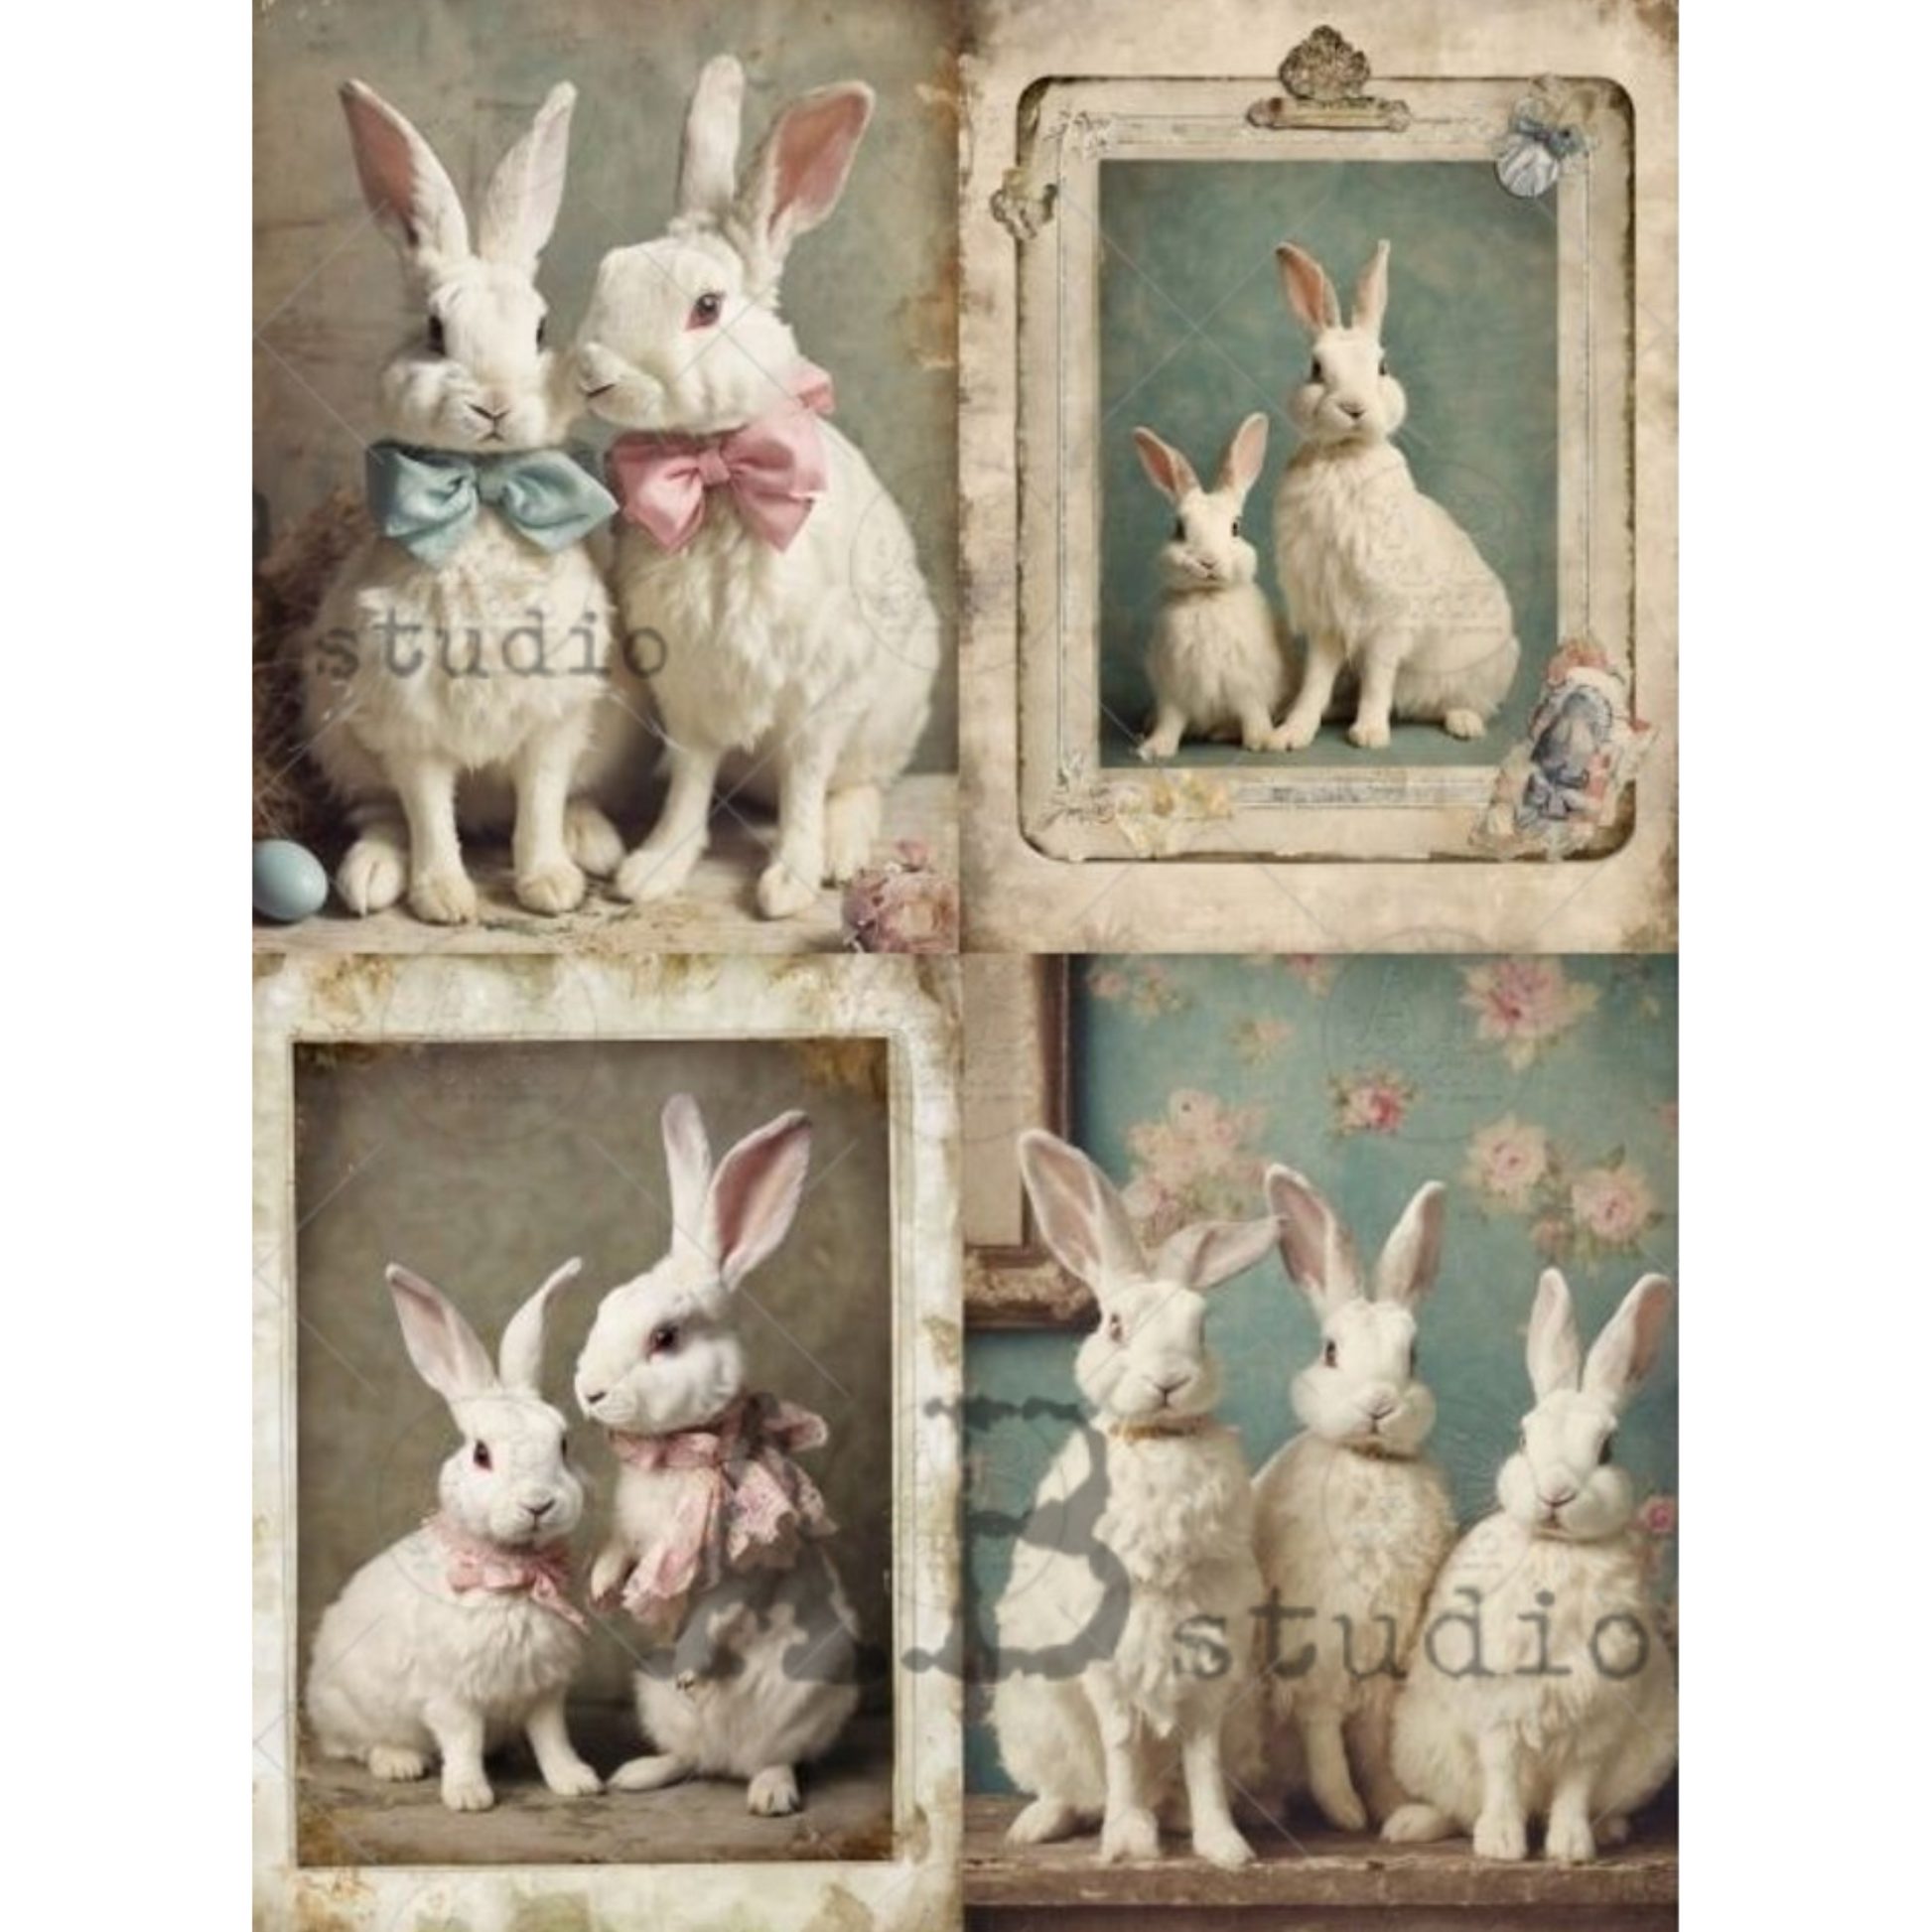 "Framed Bunny Families Shabby Chic Style" decoupage rice paper by AB Studio. Available at Milton's Daughter.